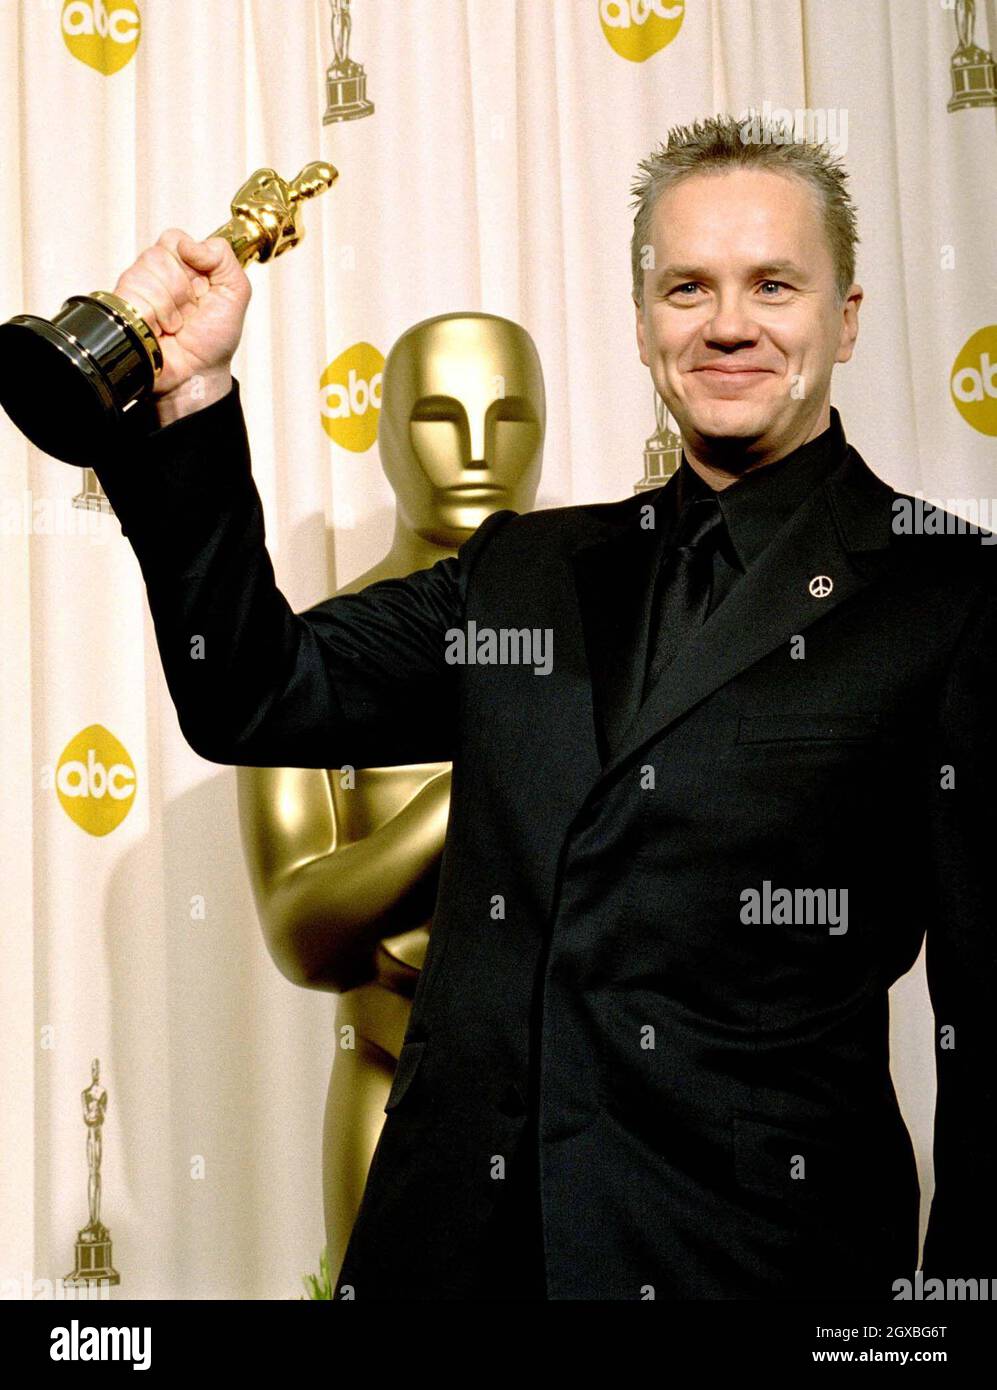 Tim Robbins, Academy Award winner for Best Supporting Actor for his work in 'Mystic River' at the 76th Annual Academy Awards from the Kodak Theater in Hollywood. Stock Photo